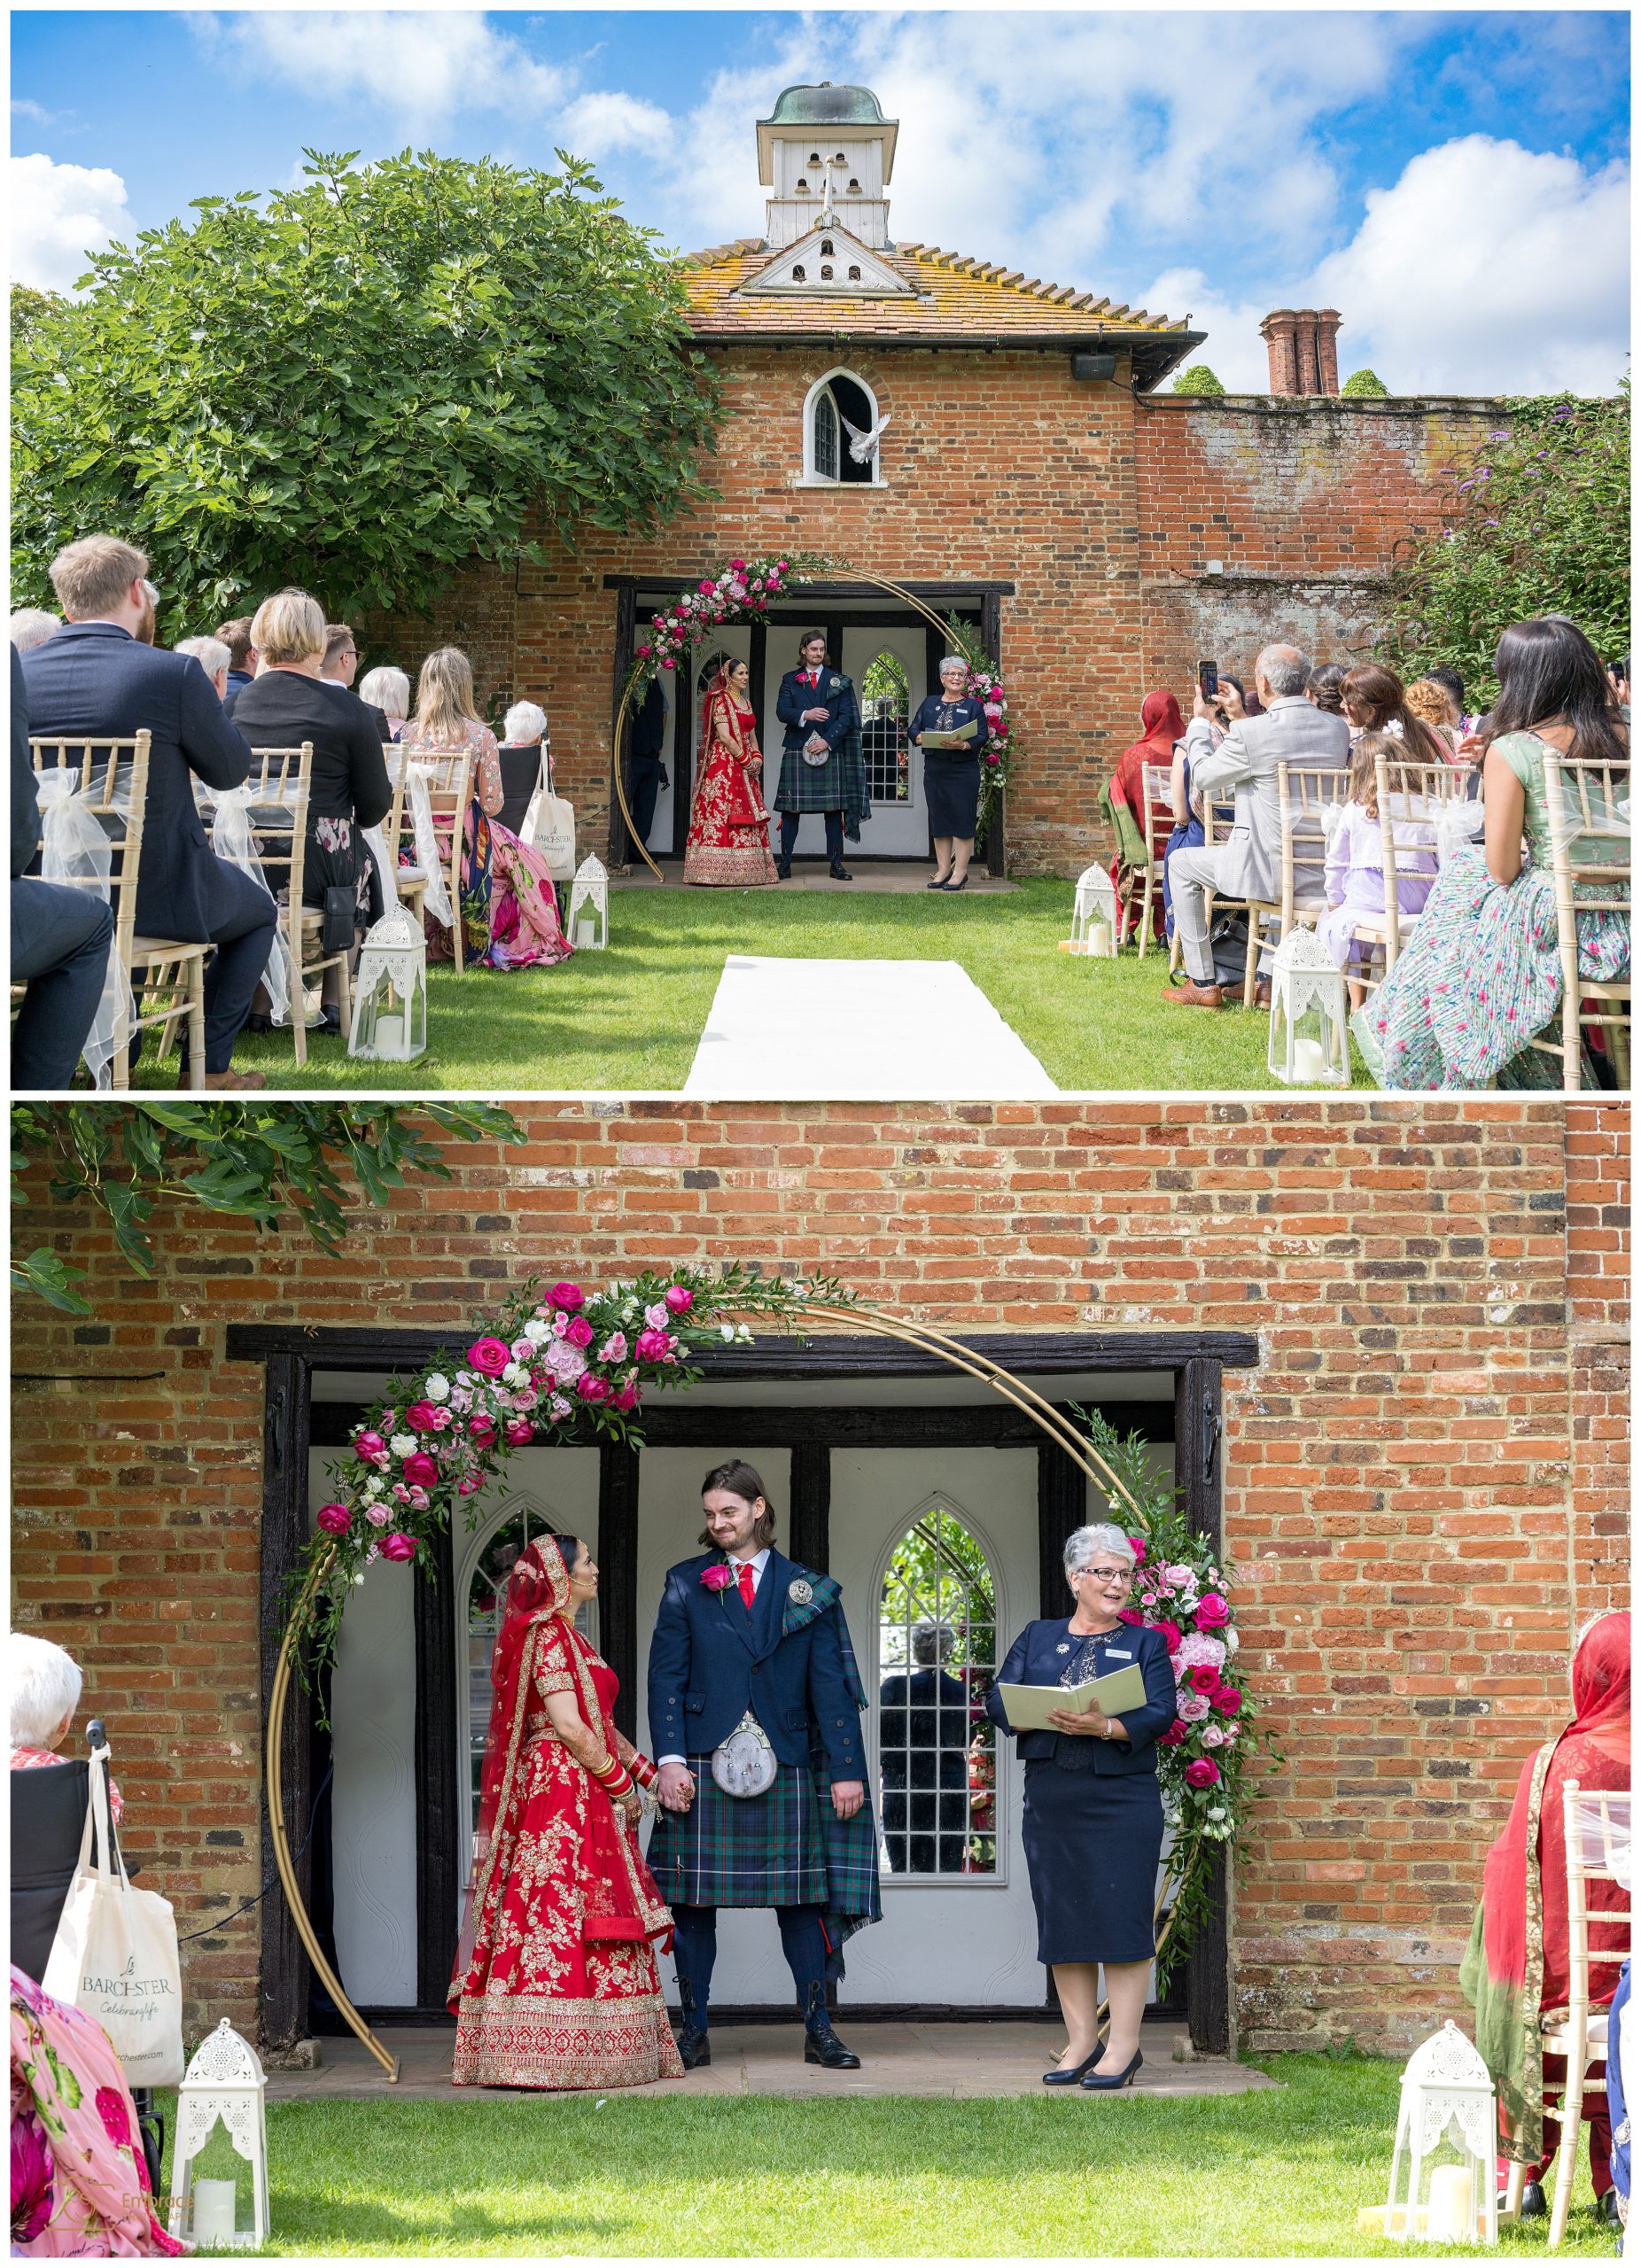 A wedding ceremony taking place between Indian bride and Scottish groom at Woodhall Manor, Suffolk